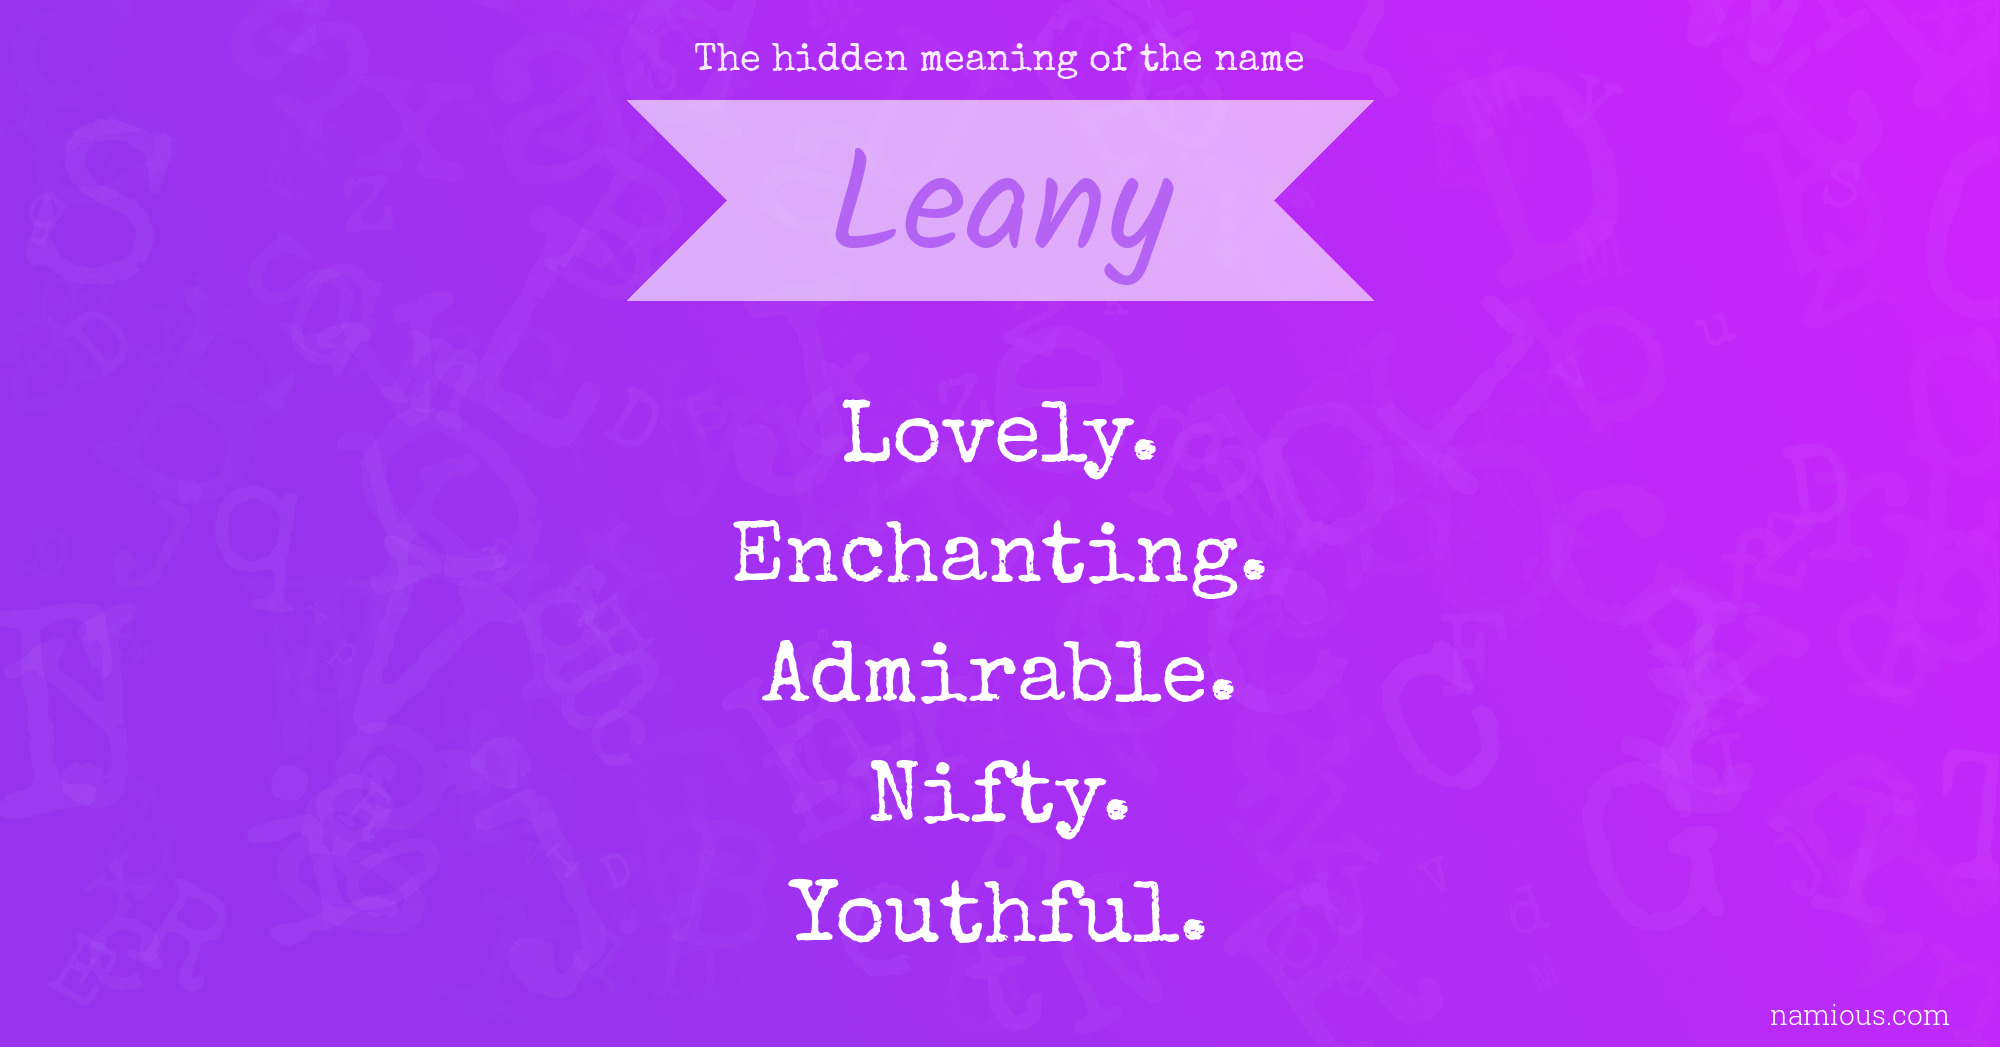 The hidden meaning of the name Leany